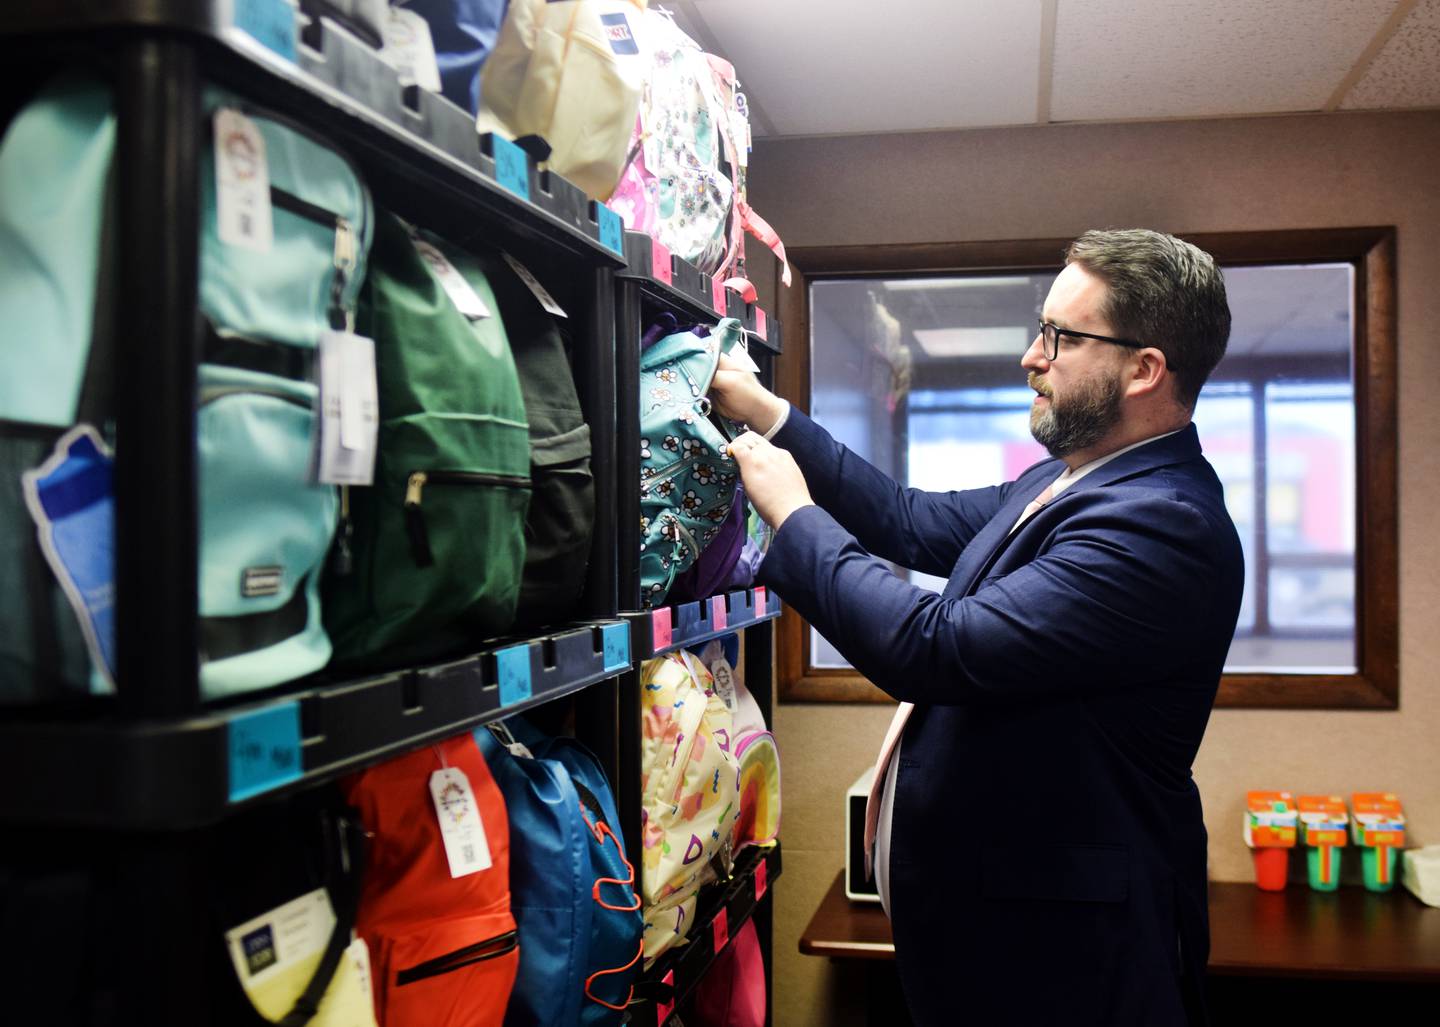 Nicholas Pietrack, assistant county attorney and founder of the Open Arms Foundation Jasper County, shows off the First Night Backpacks by the newly established nonprofit, which aims to improve the lives of children in foster care and those who had to be removed from families due to abuse.